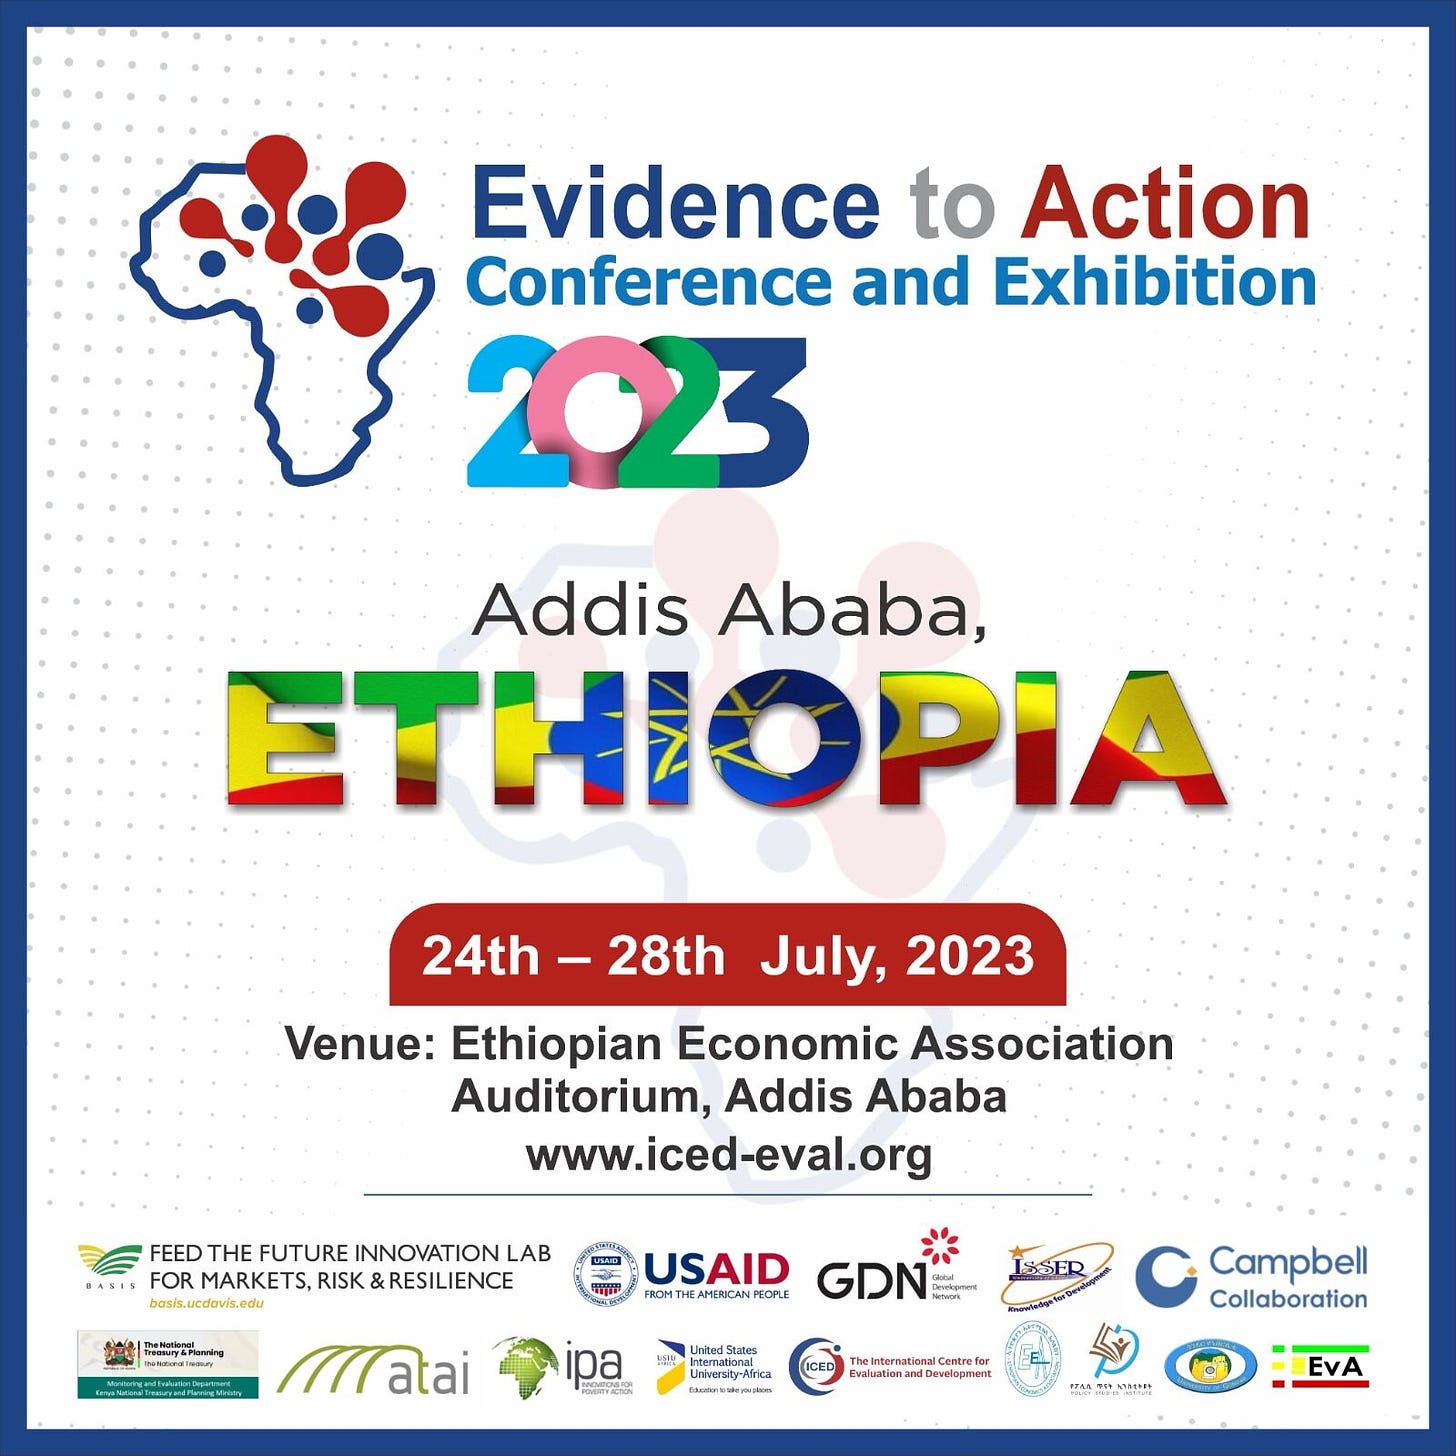 Evidence to Action 2023 will take place in Addis Ababa, Ethiopia from 24-28 July 2023 at the Ethiopian Economic Association Auditorium